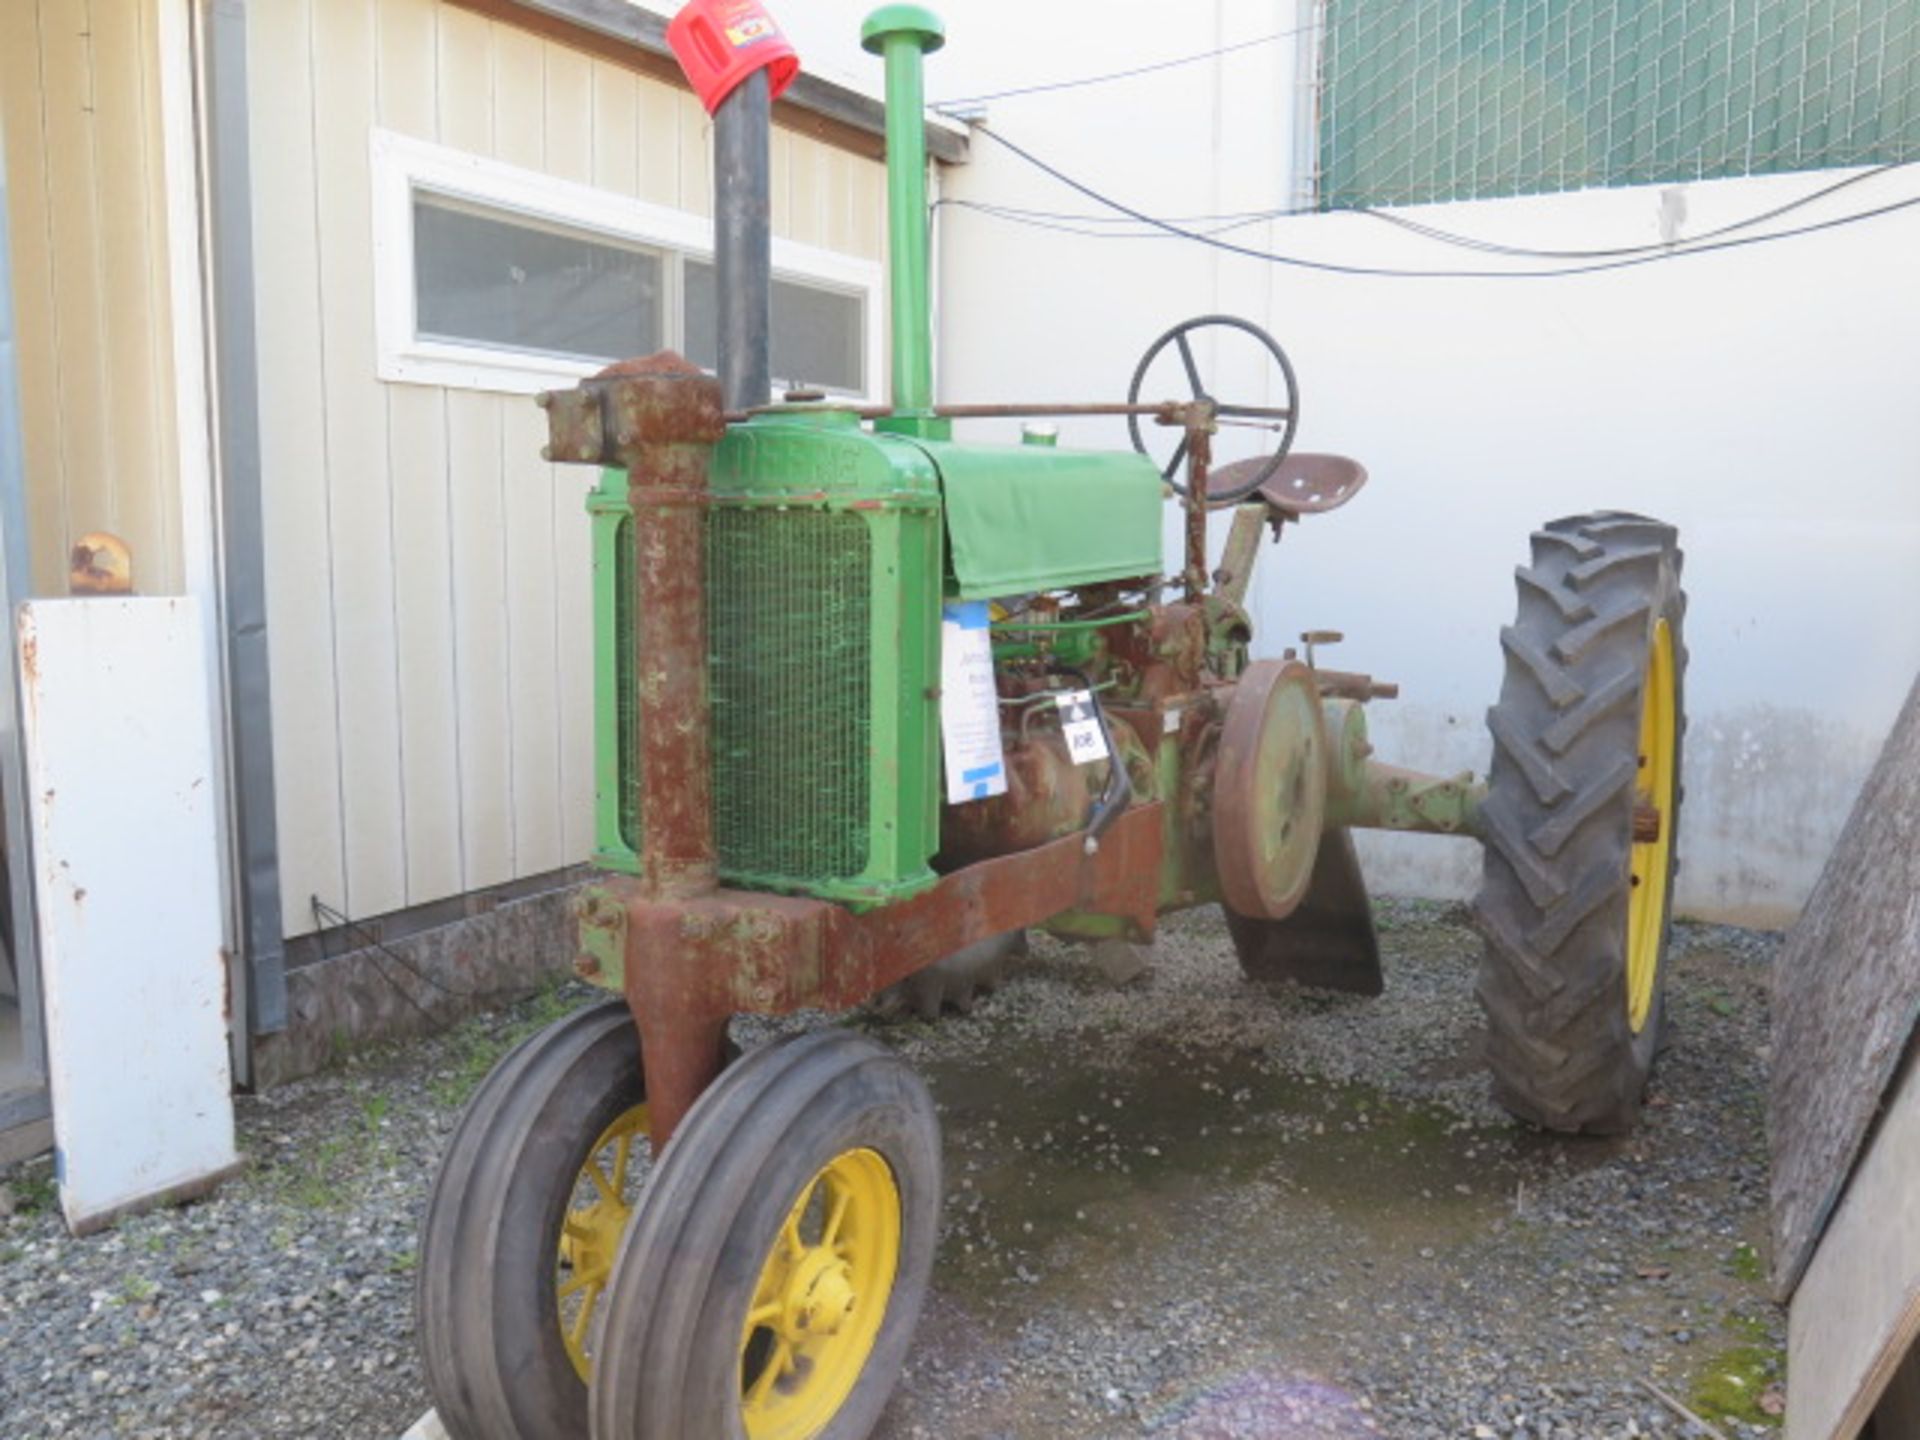 1937 John Deere mdl. G Tractor s/n 1115 Restoration Project with Many New Parts SOLD AS IS